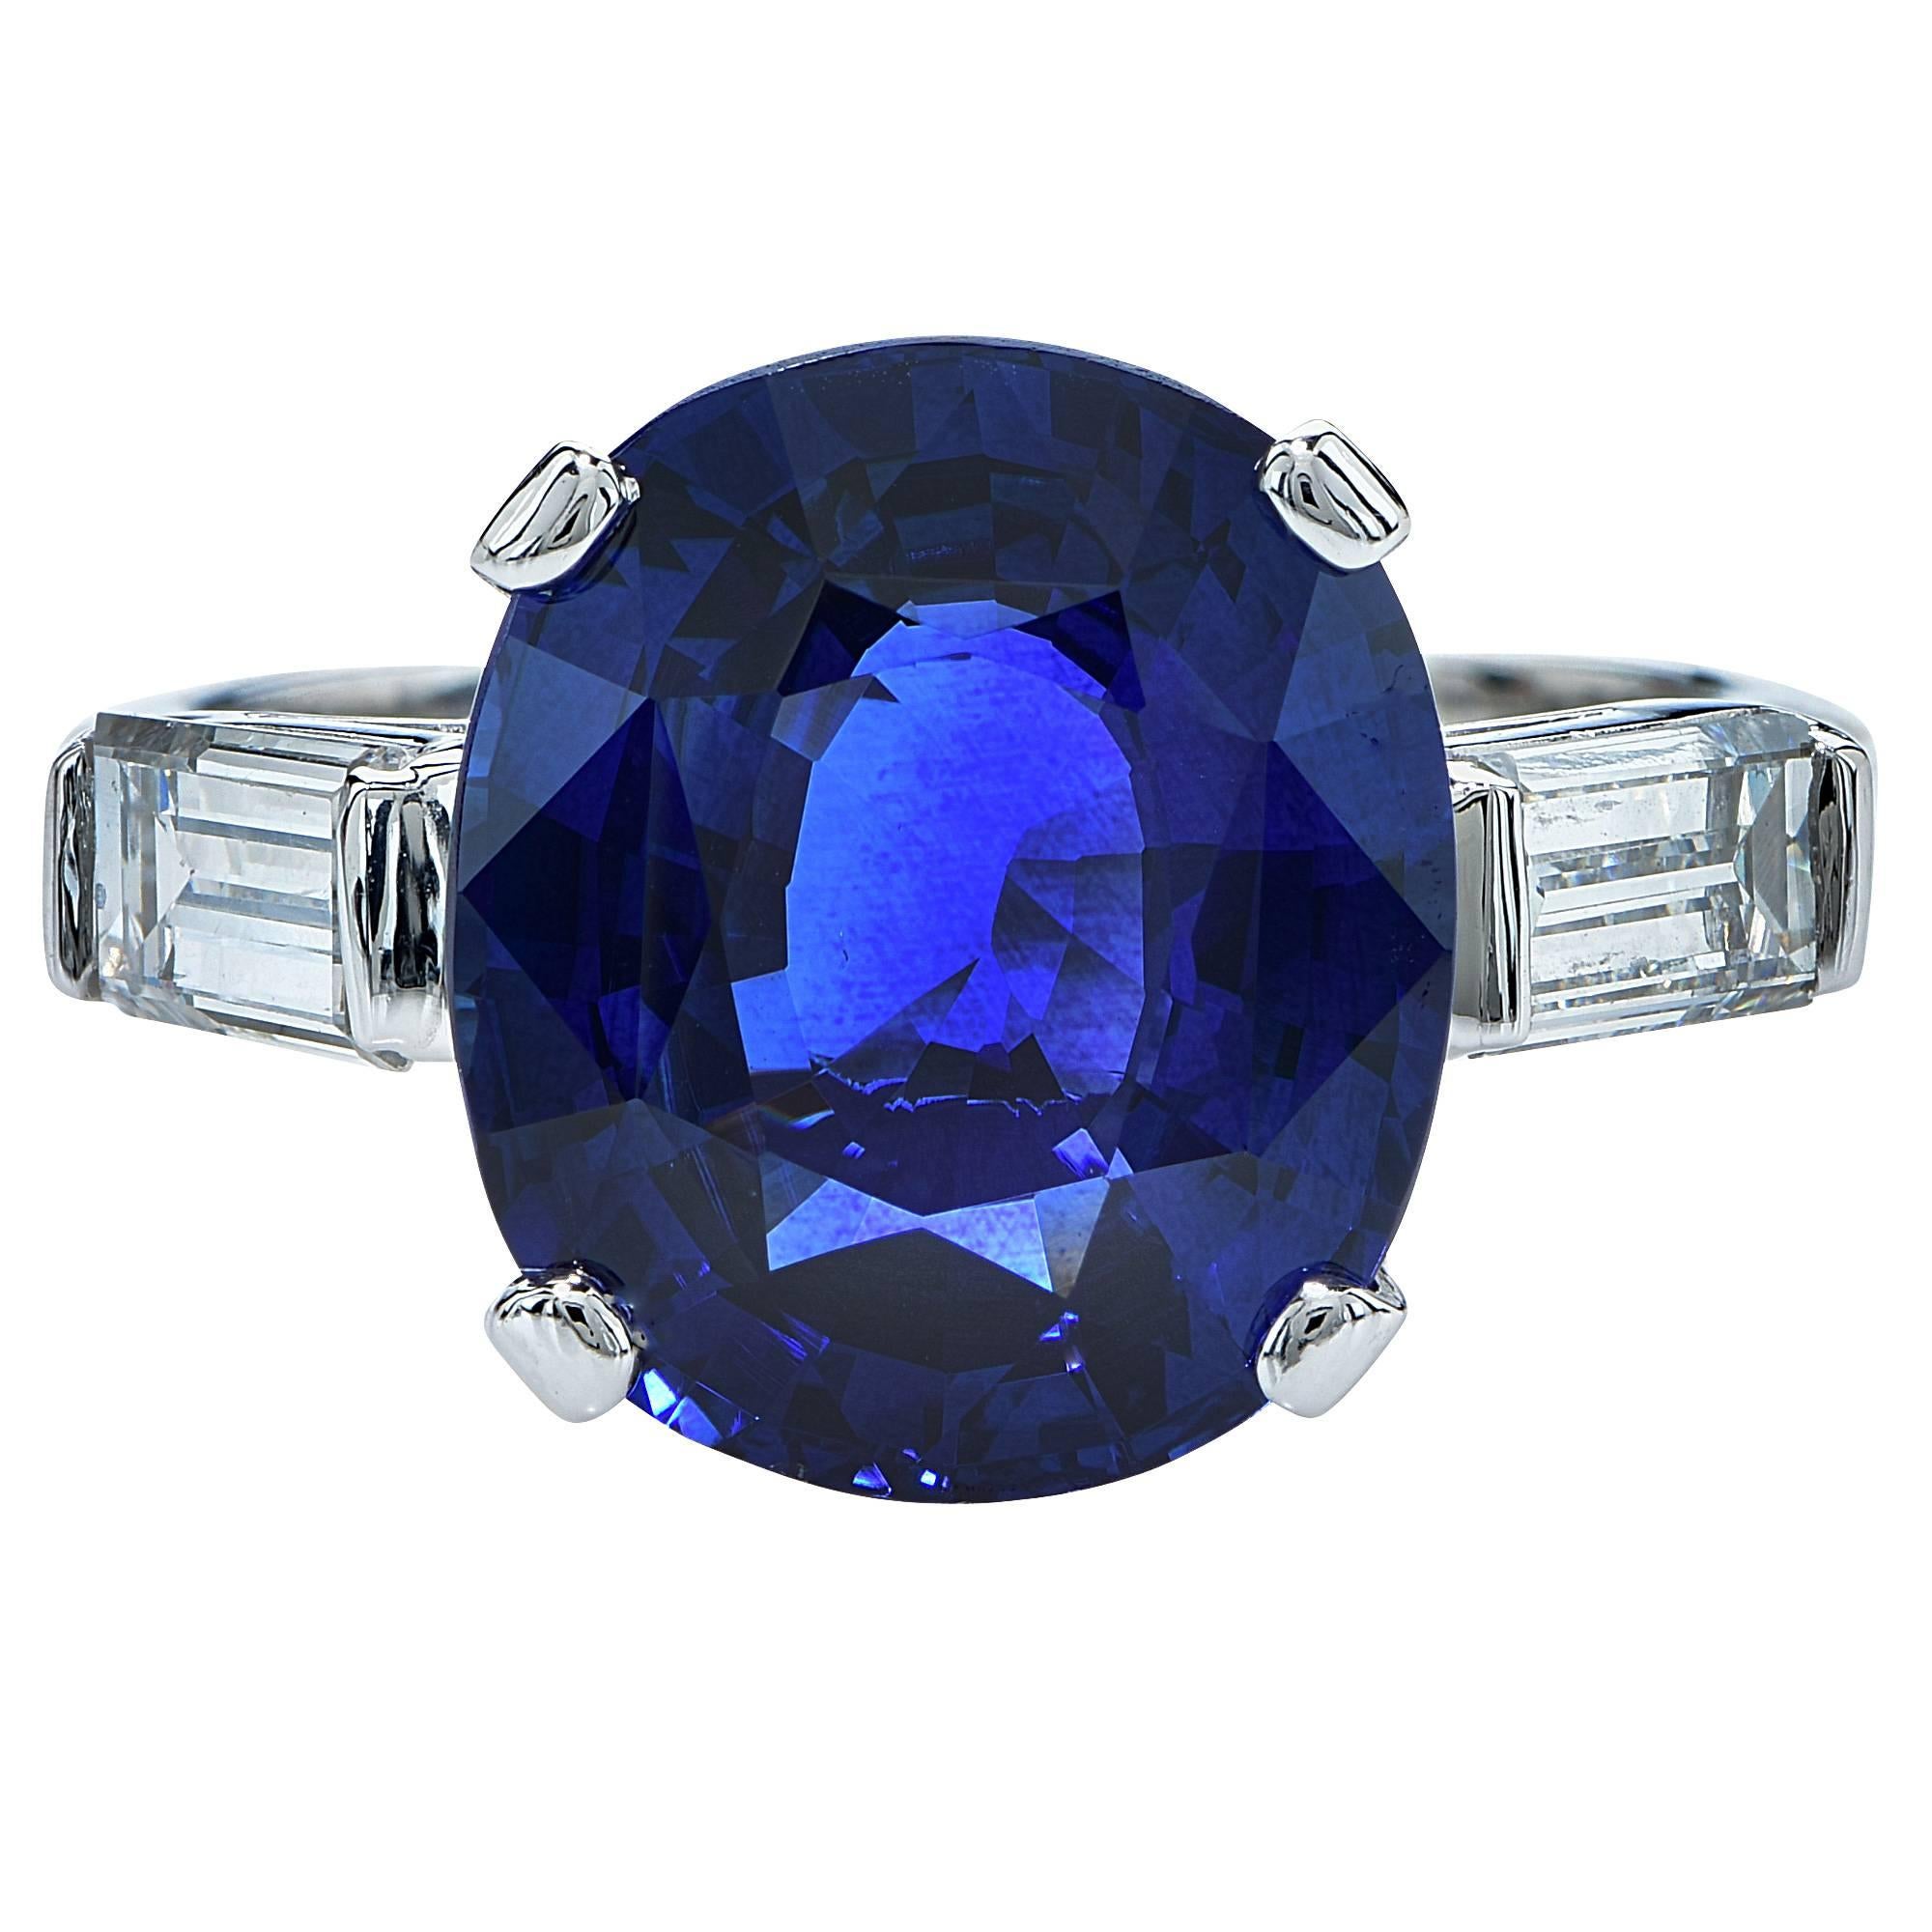 Platinum Tiffany & Co. ring set with a gorgeous 7ct royal blue cushion cut sapphire flanked by 2 straight baguettes weighing approximately .80cts F color and VS clarity.

Ring size: 6
Metal weight: 7.47 grams

This gorgeous Tiffany & Co.